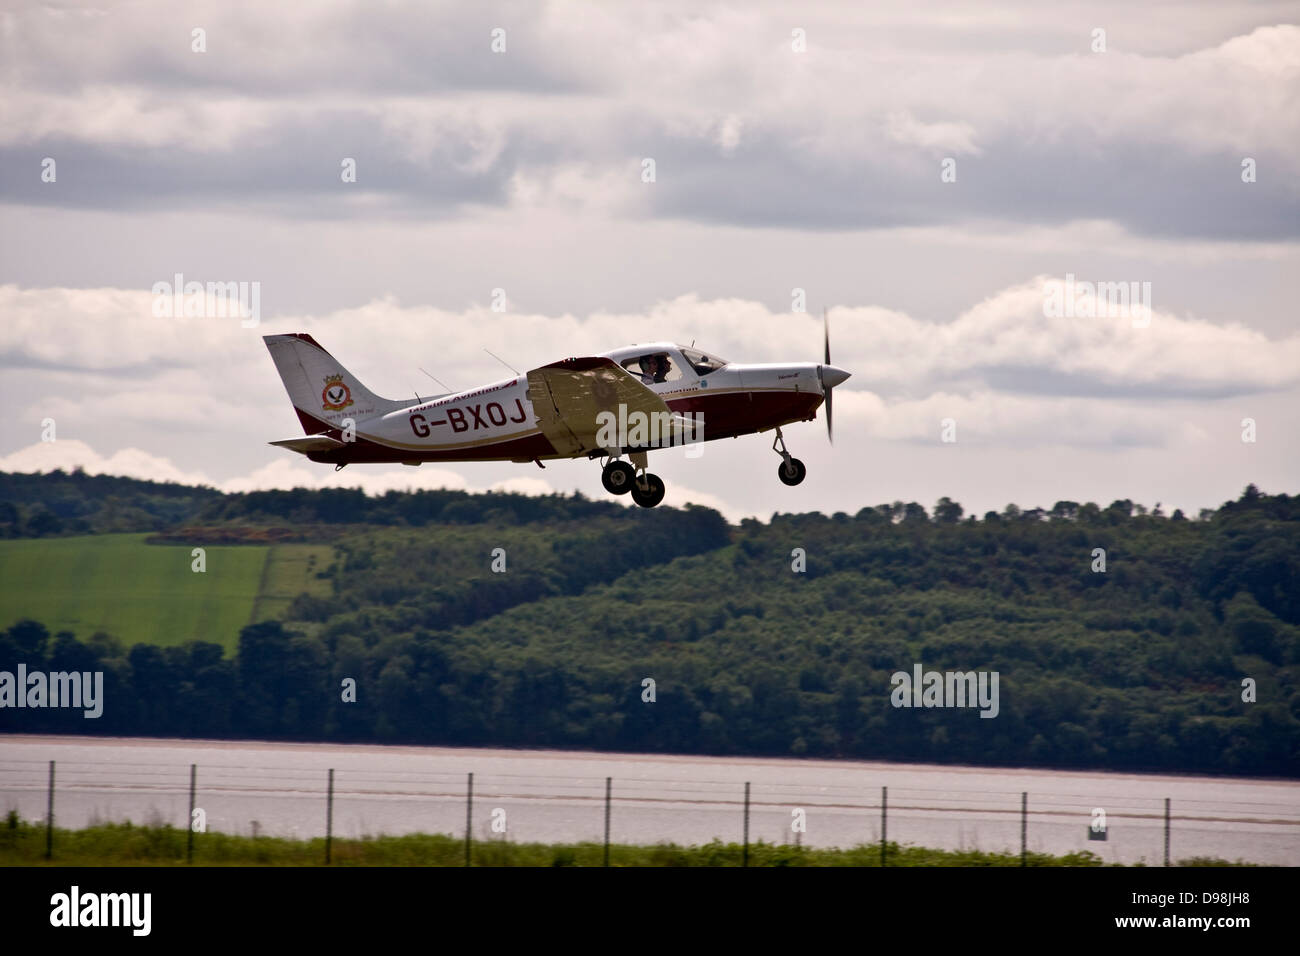 The Tayside Aviation G-BXOJ Training aircraft taking off from Dundee Airport, UK Stock Photo